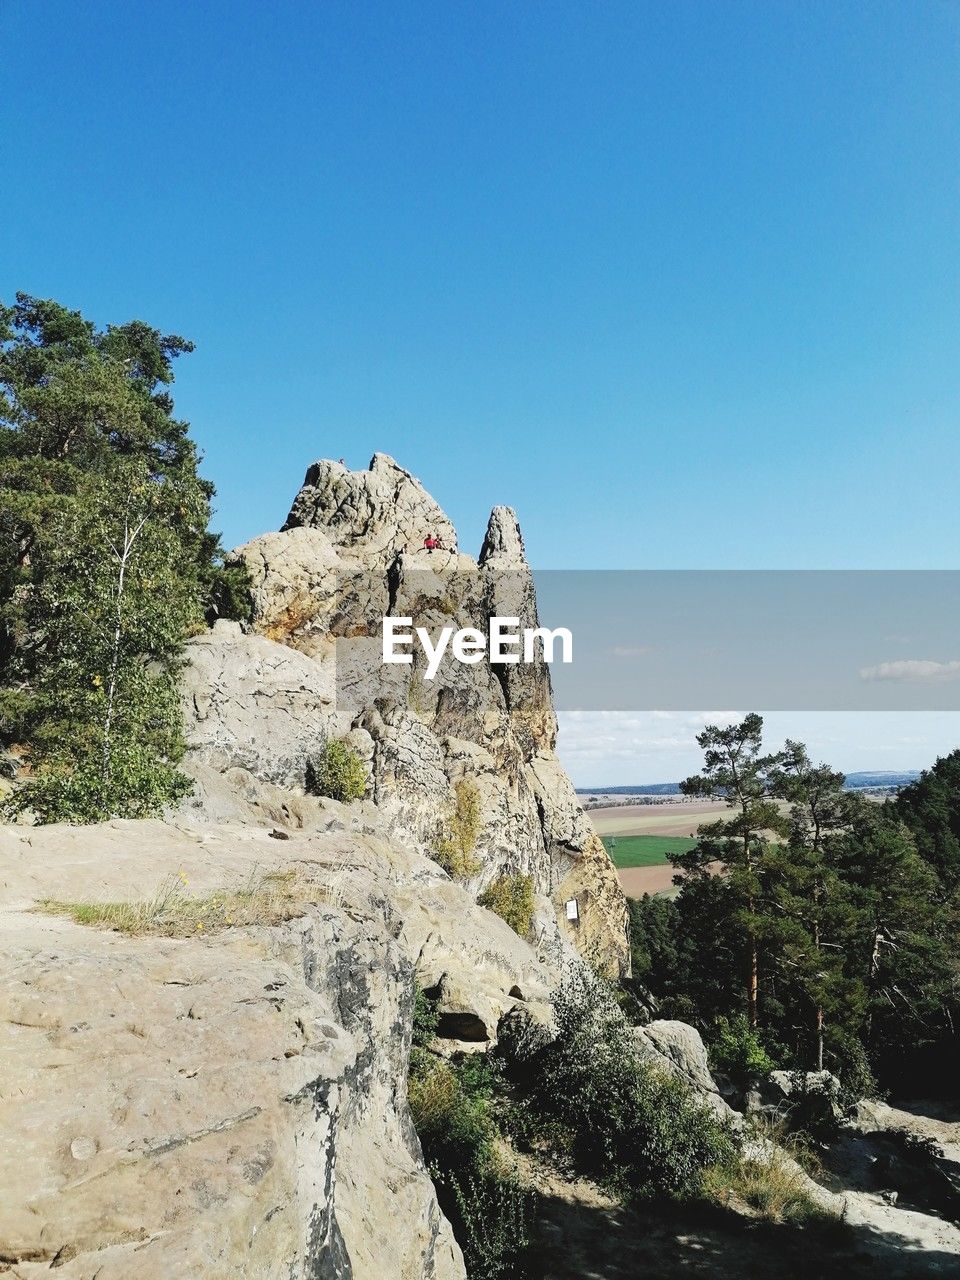 sky, rock, nature, plant, tree, scenics - nature, clear sky, beauty in nature, land, mountain, sea, blue, vacation, travel destinations, tranquility, environment, cliff, no people, travel, landscape, day, sunny, rock formation, tranquil scene, non-urban scene, outdoors, coast, water, sunlight, terrain, adventure, geology, tourism, pinaceae, coniferous tree, pine tree, mountain range, idyllic